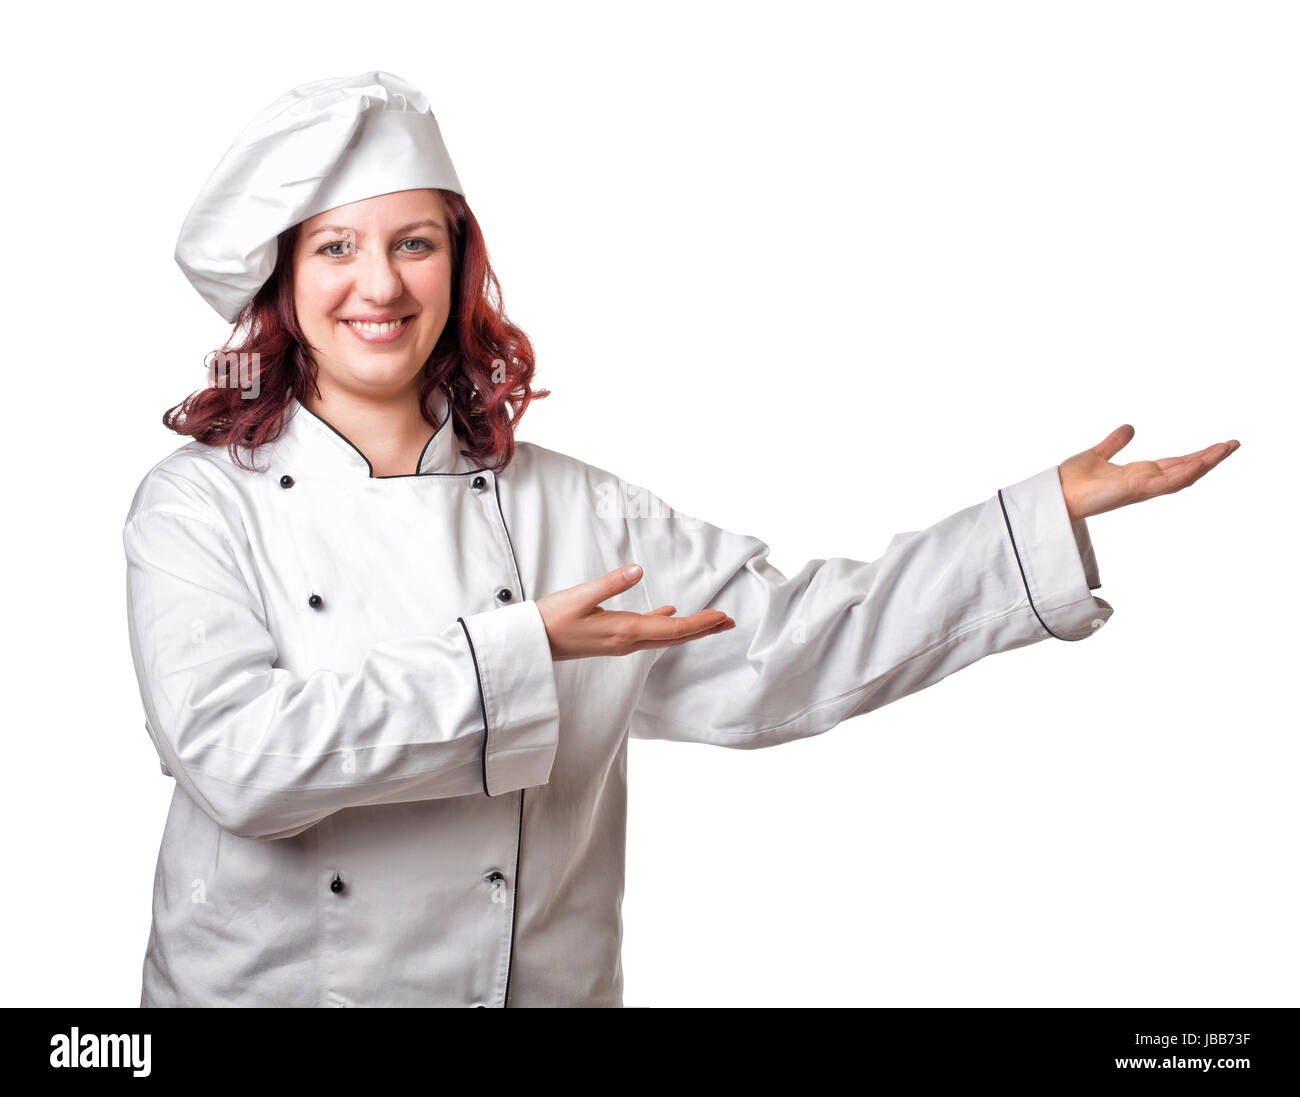 smiling young woman chef portrait Stock Photo